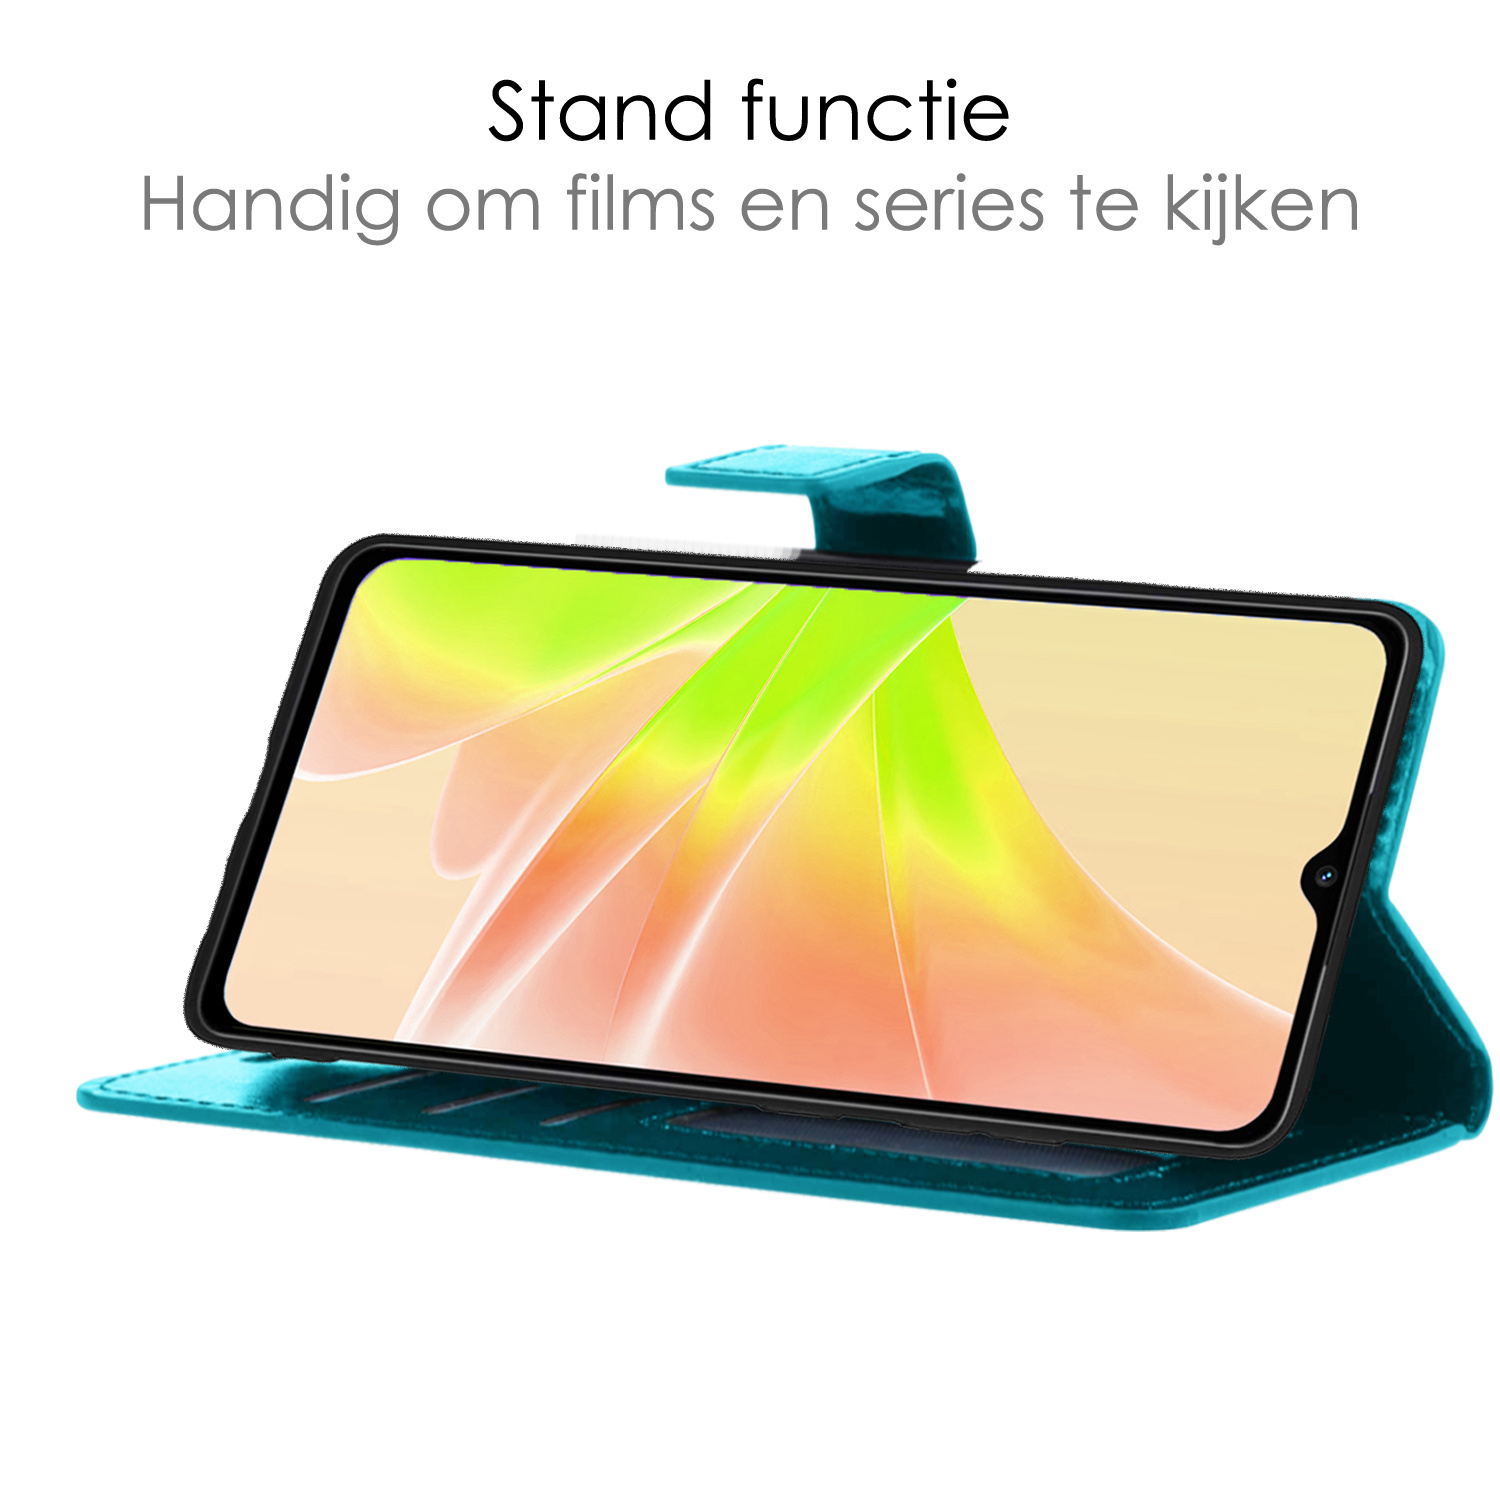 Hoes Geschikt voor OPPO A57s Hoesje Book Case Hoes Flip Cover Wallet Bookcase - Turquoise